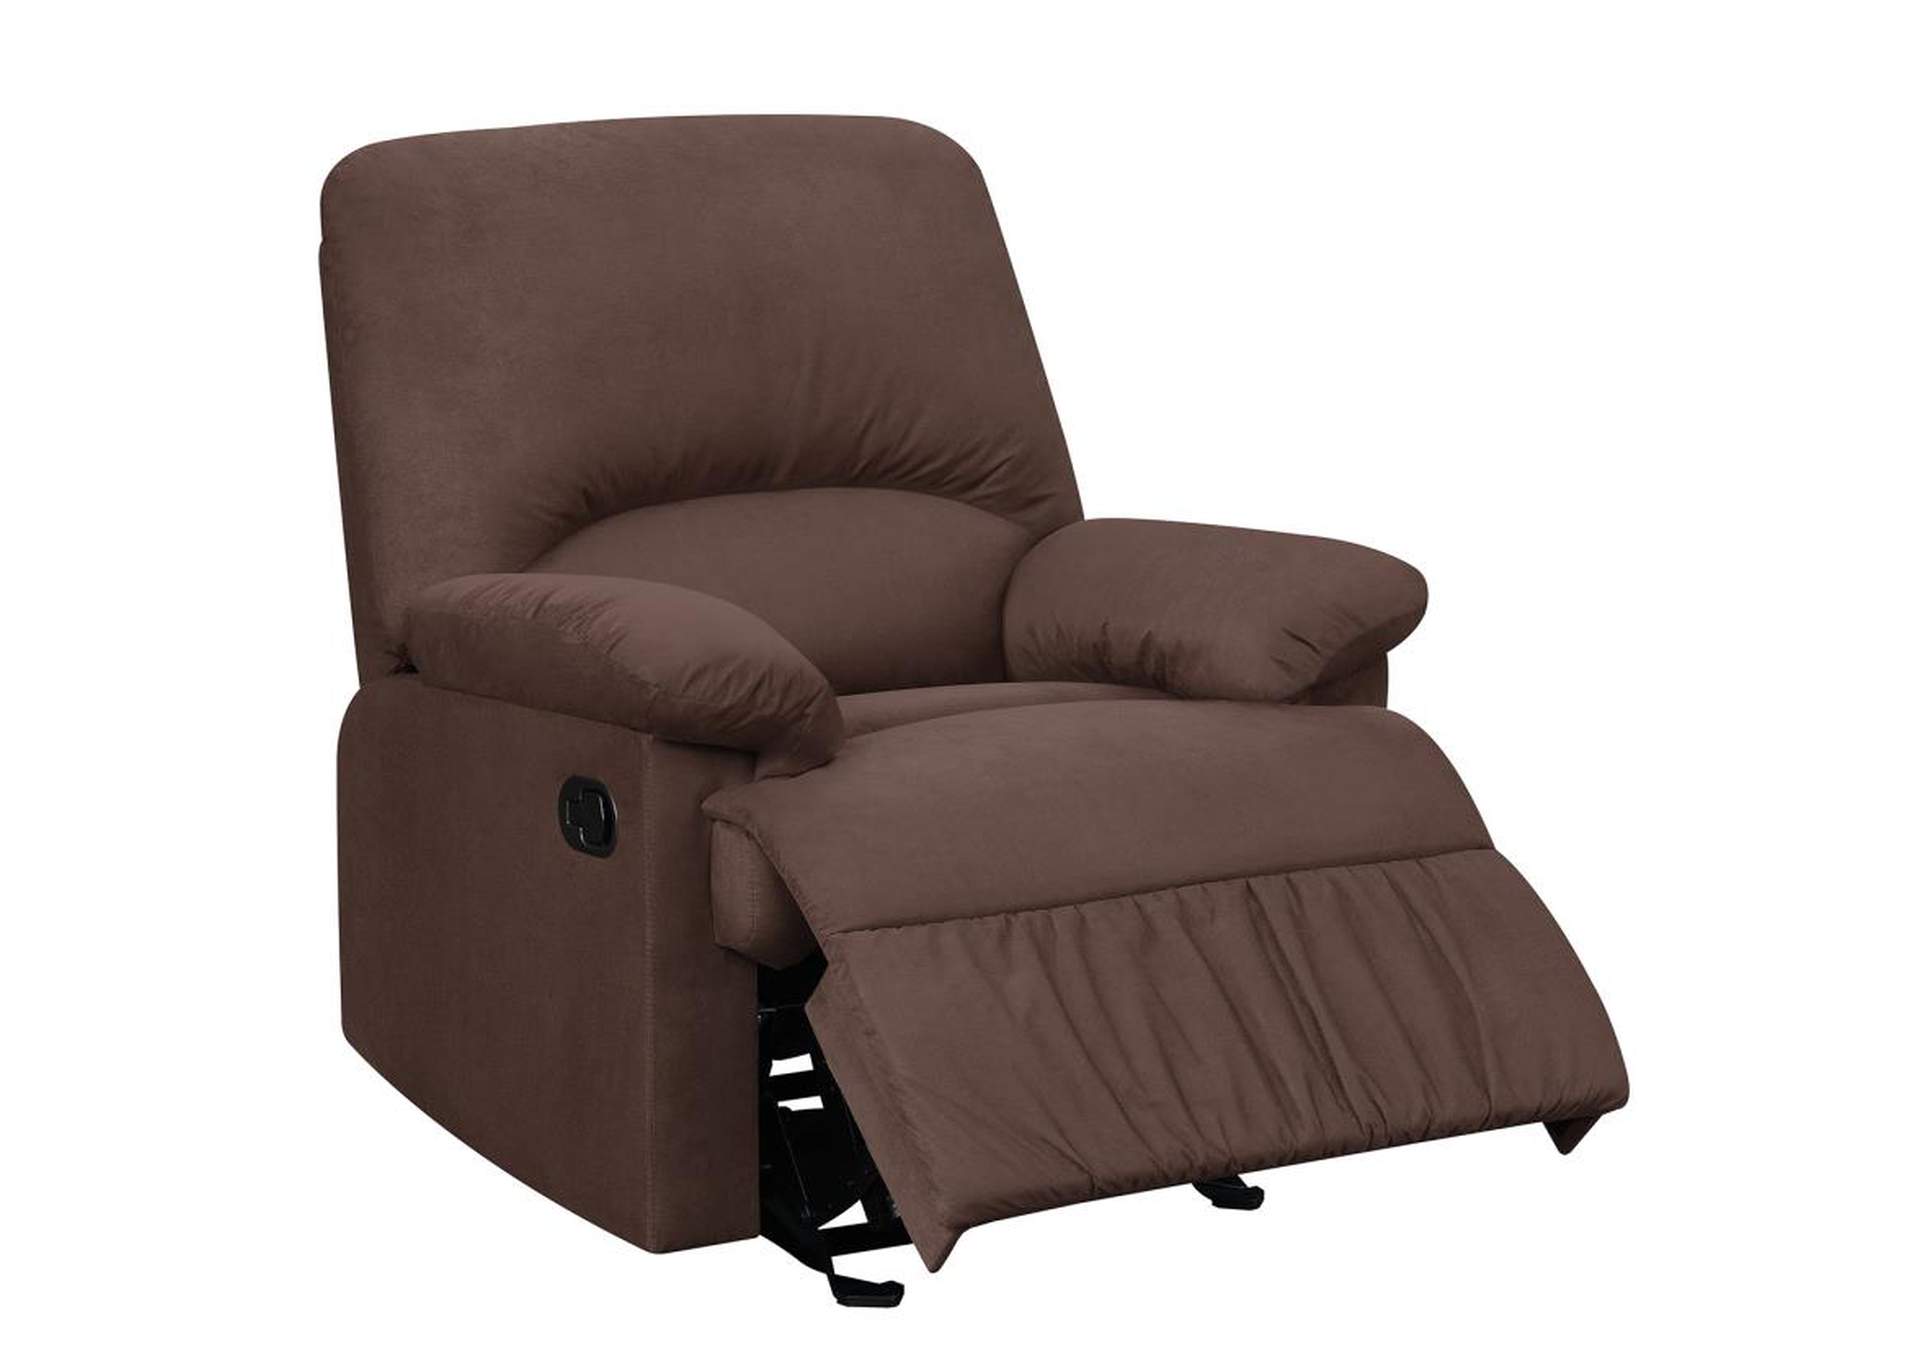 Upholstered Glider Recliner Chocolate,Coaster Furniture